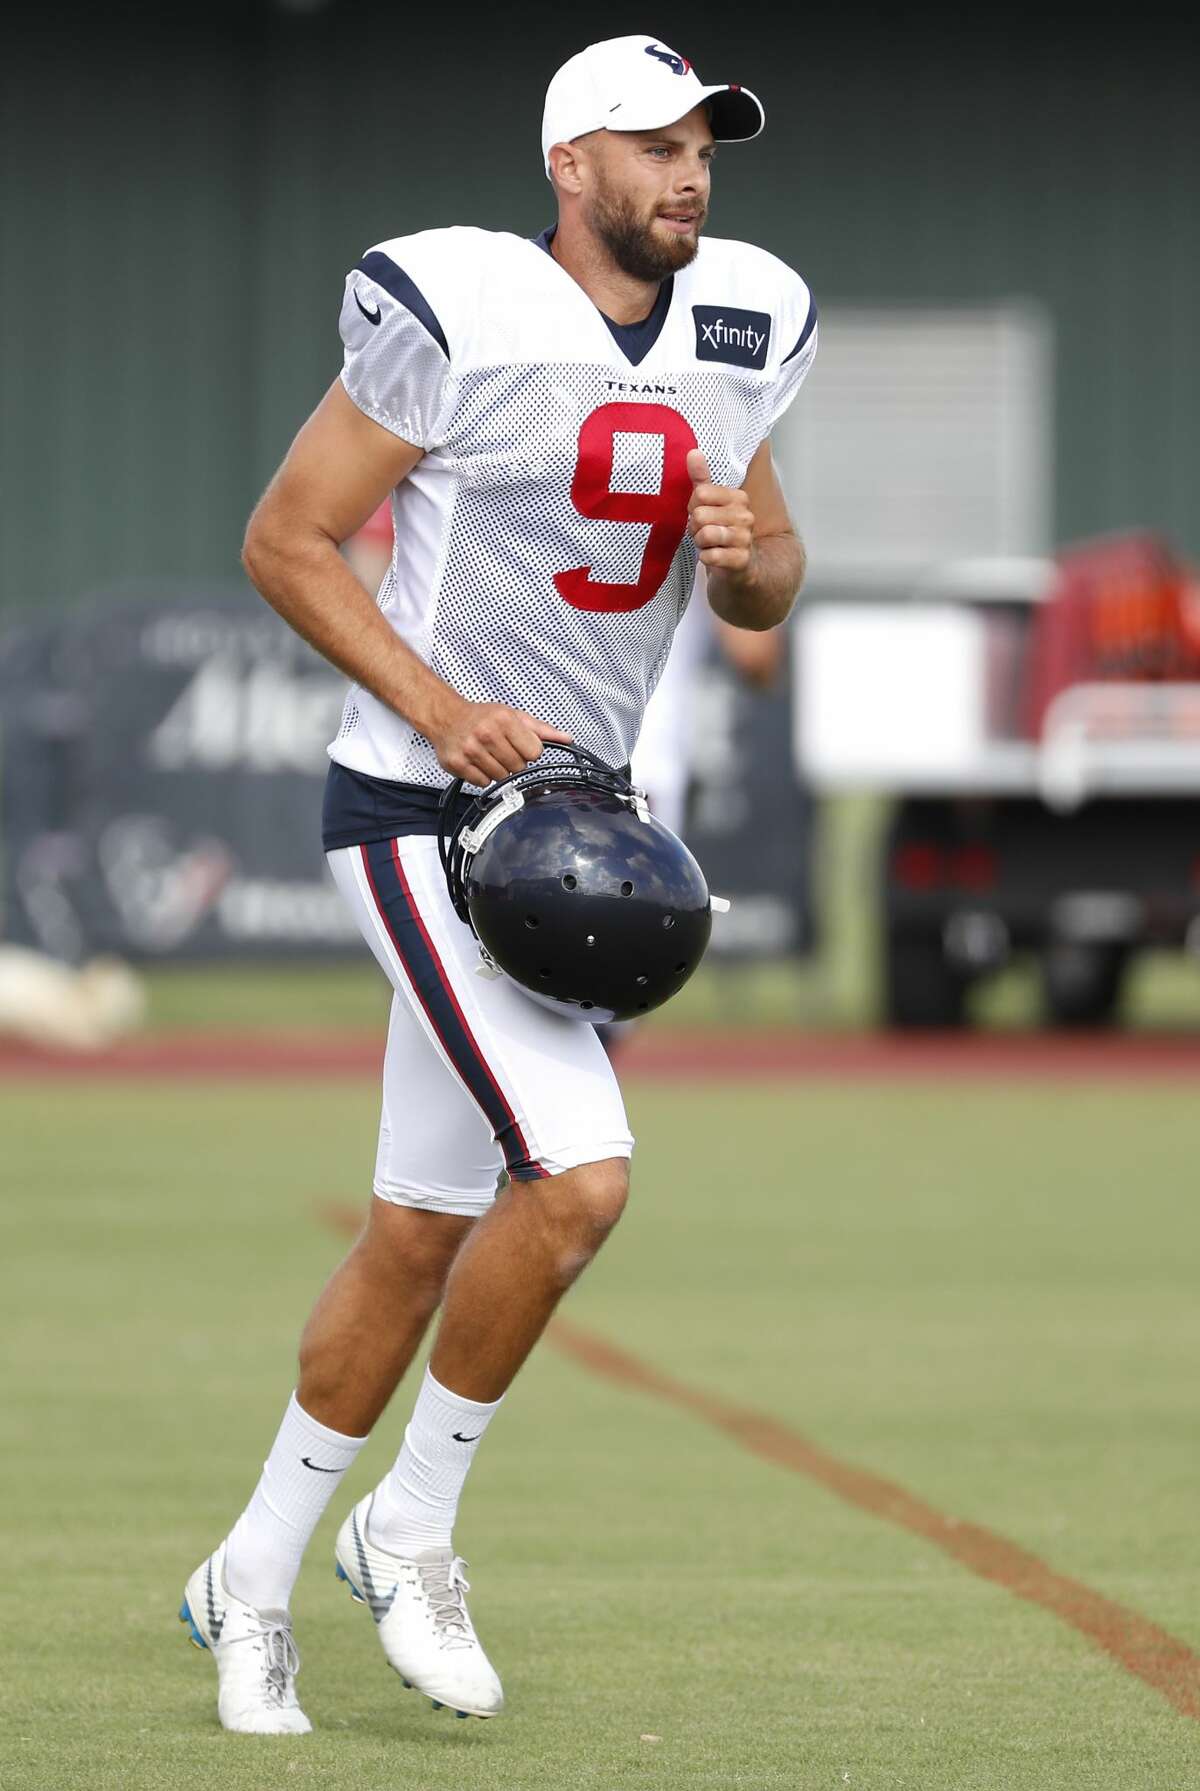 Houston Texans punter Bryan Anger jogs across the practice field during training camp at the Methodist Training Center on Saturday, July 27, 2019, in Houston.